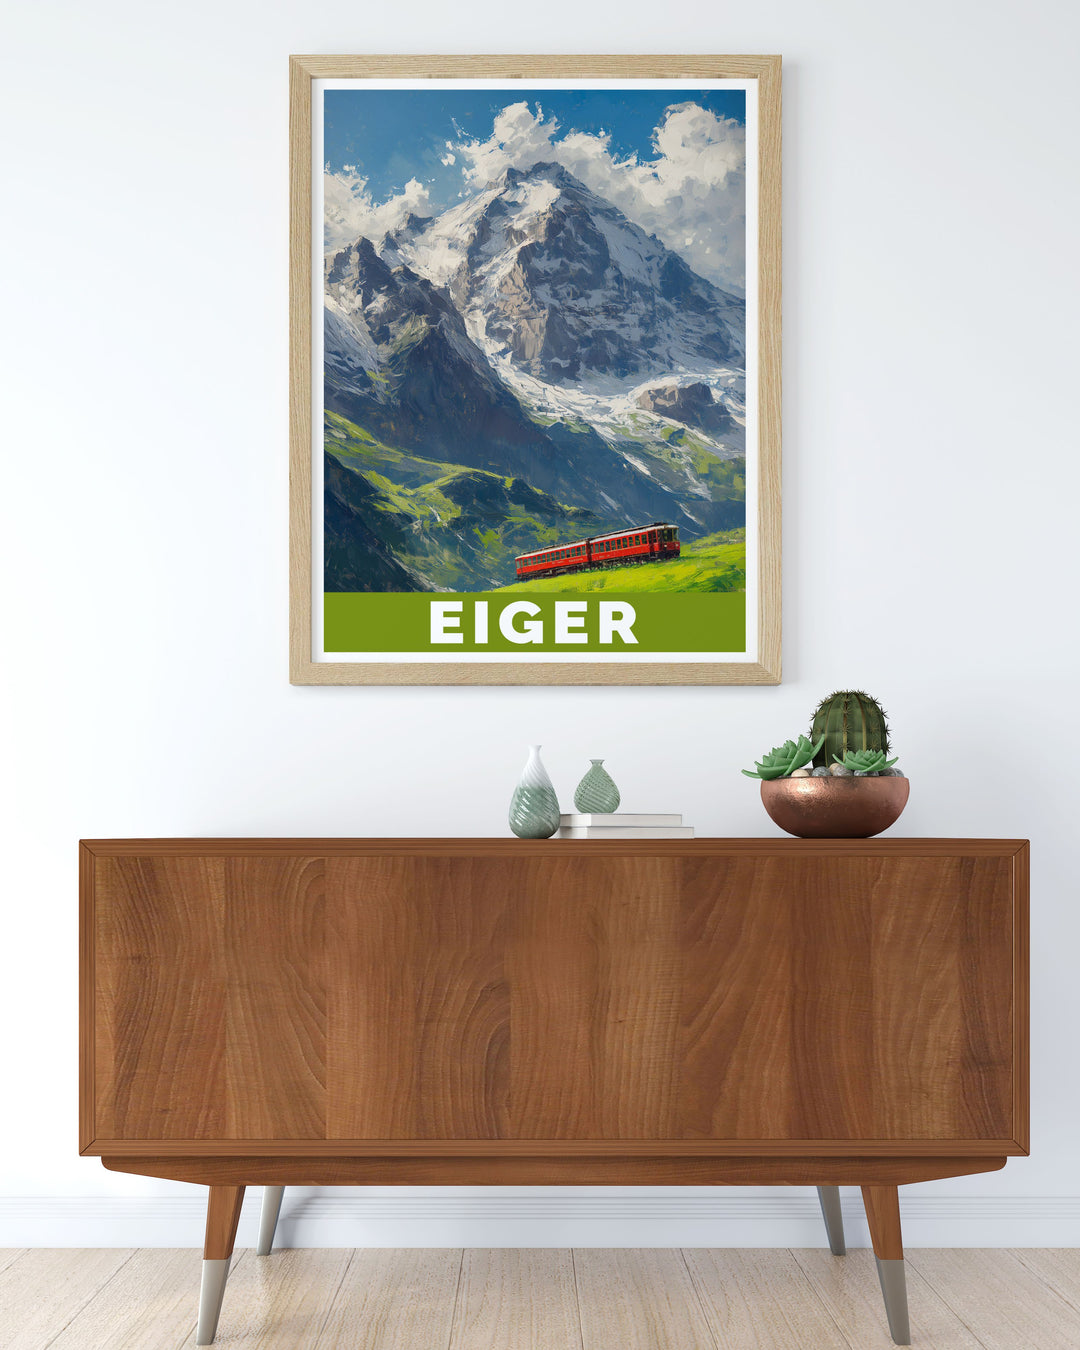 Elegant framed print of Eiger and Grindelwald village bringing the serene and picturesque landscape of the Swiss Alps into your space ideal for creating an inspiring and calming atmosphere with high quality art prints.